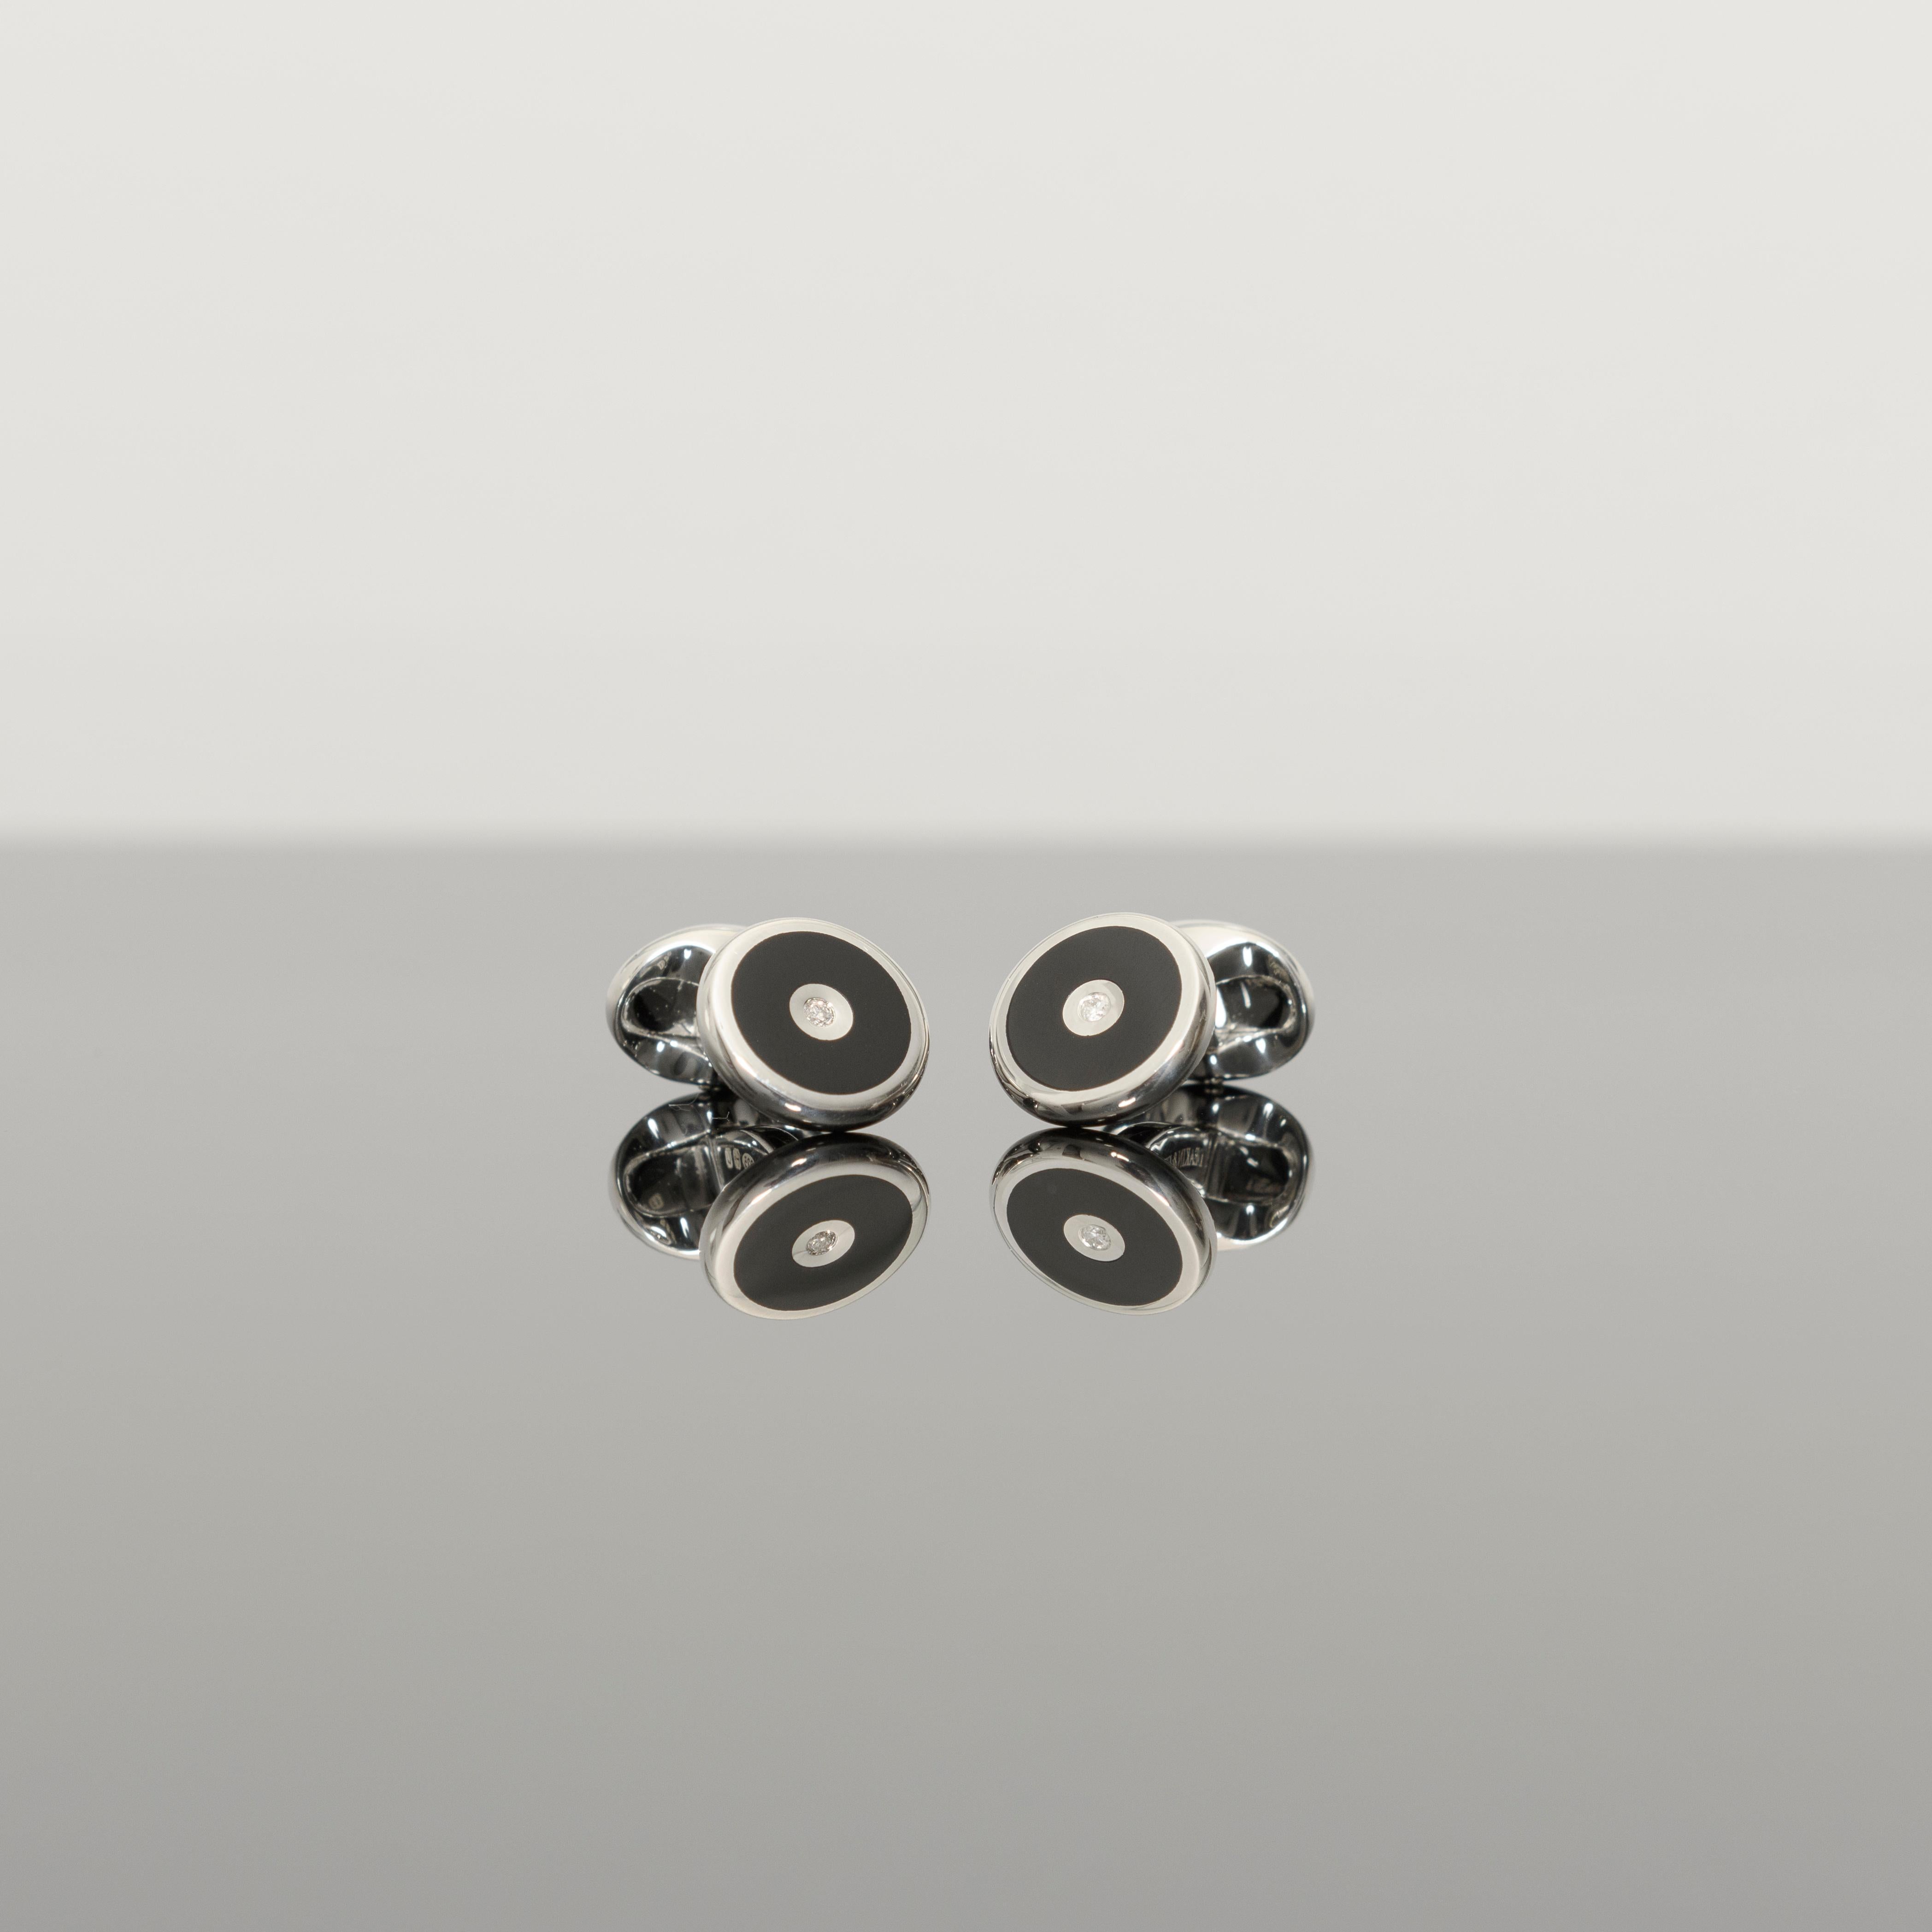 DEAKIN & FRANCIS, Piccadilly Arcade, London

For well dressed gentlemen, a pair of classic round cufflinks are ideal. These sterling silver cufflinks have been given a contemporary twist with a hand-cut black onyx inlay and finished with a stunning